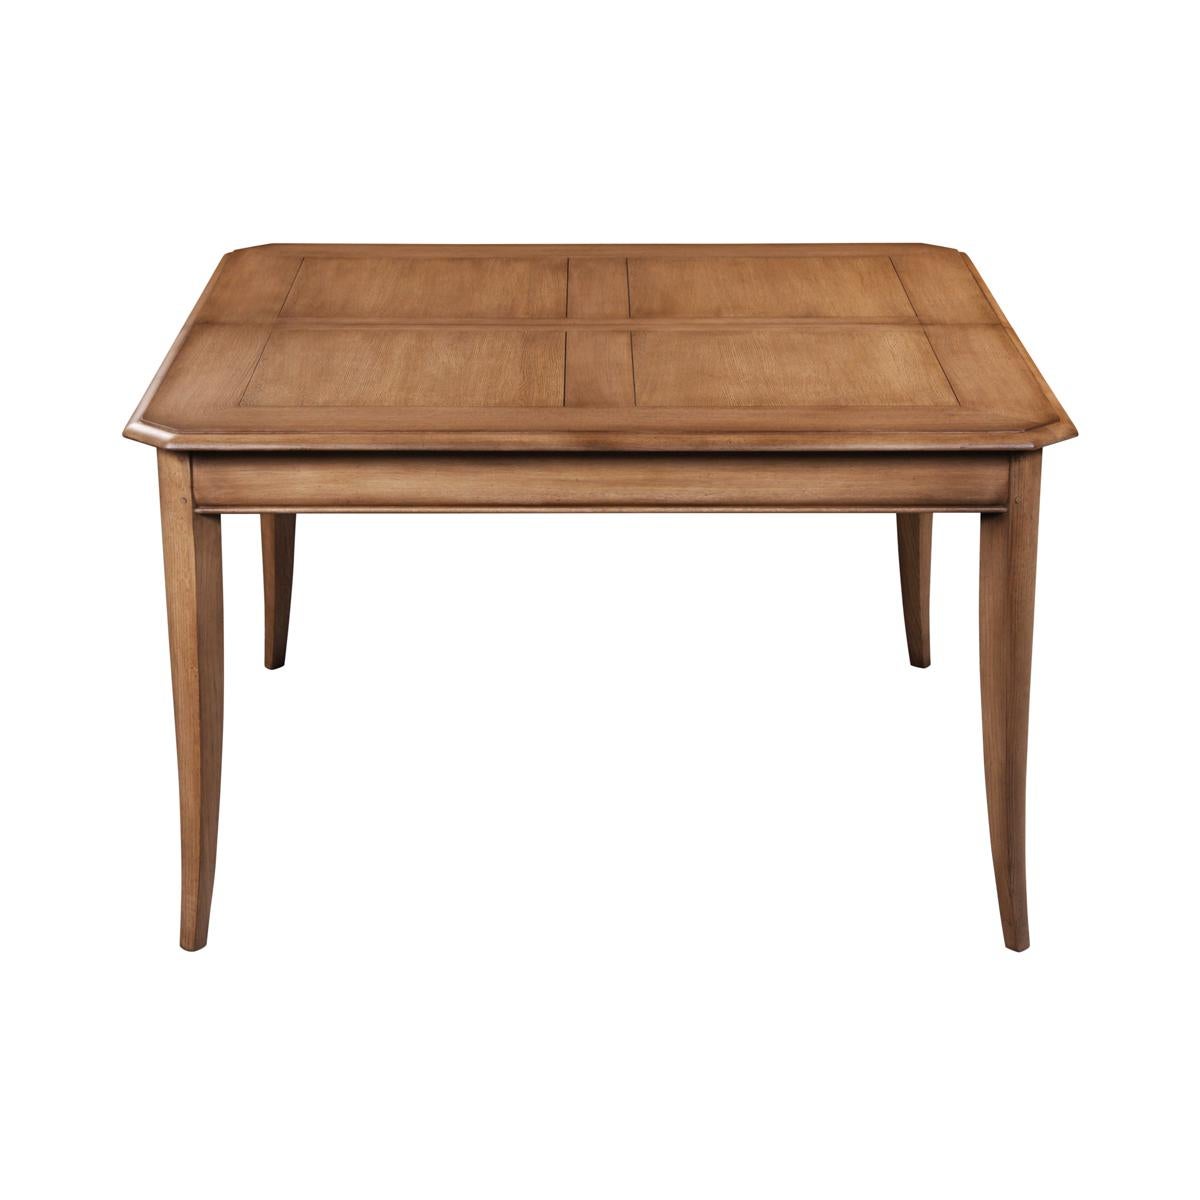 Contemporary French Tradition Extensible Square Dining Table, Chestnut Stained For Sale